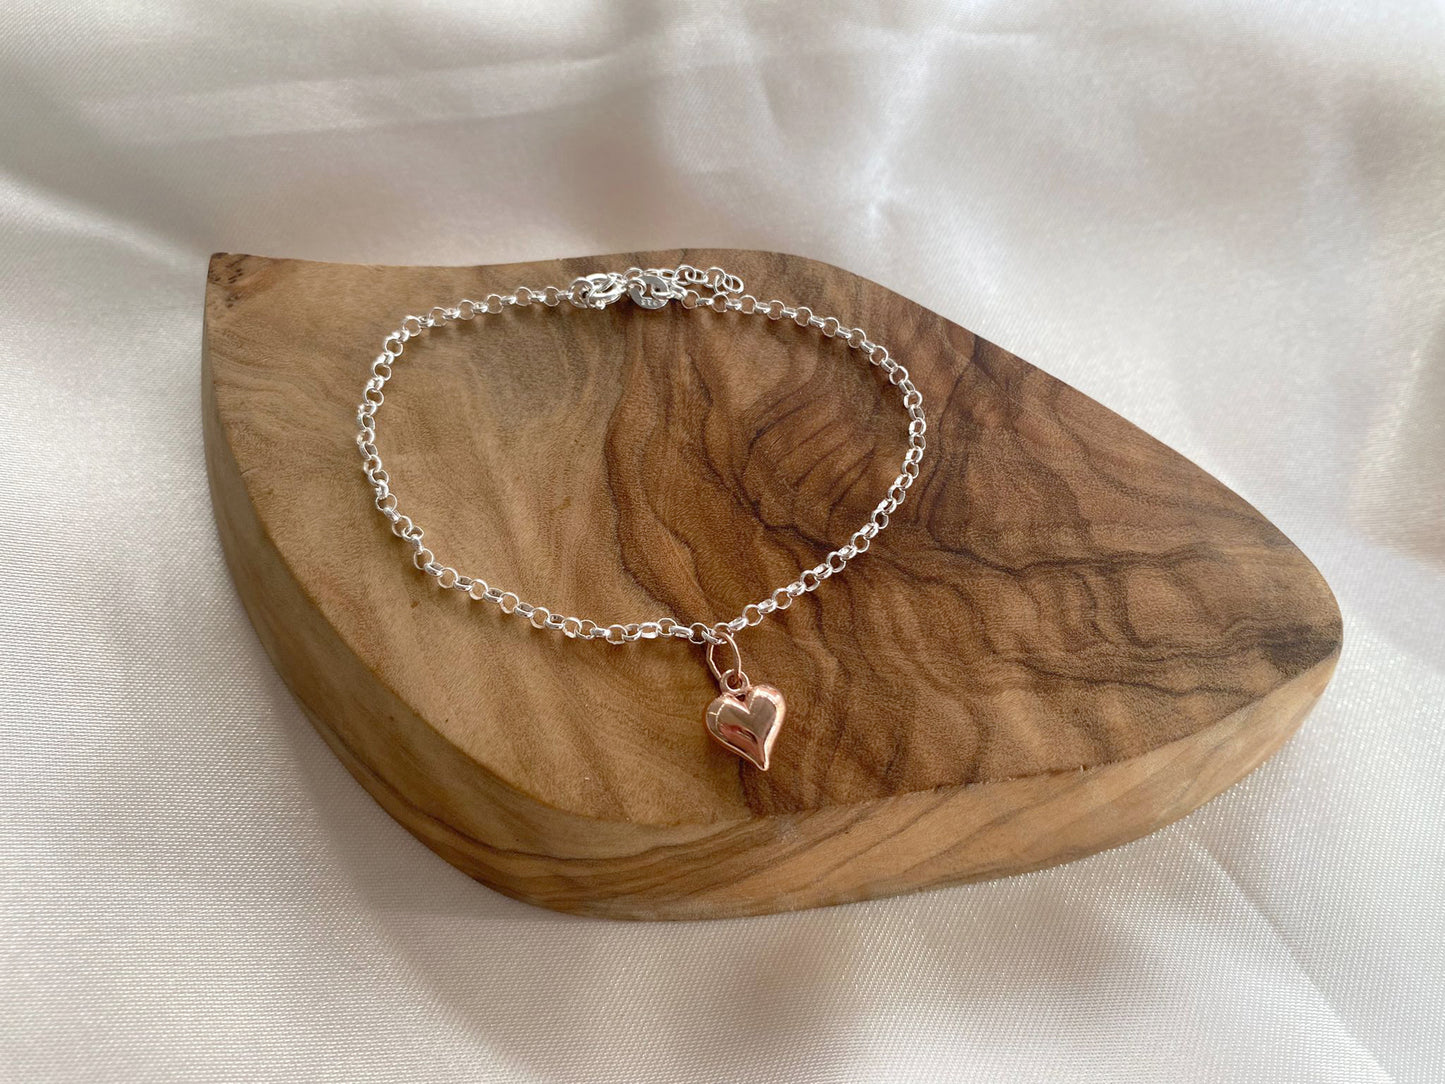 Best Friend Rose Gold Puffy Heart Bracelet in Sterling Silver 925, Personalised Gift